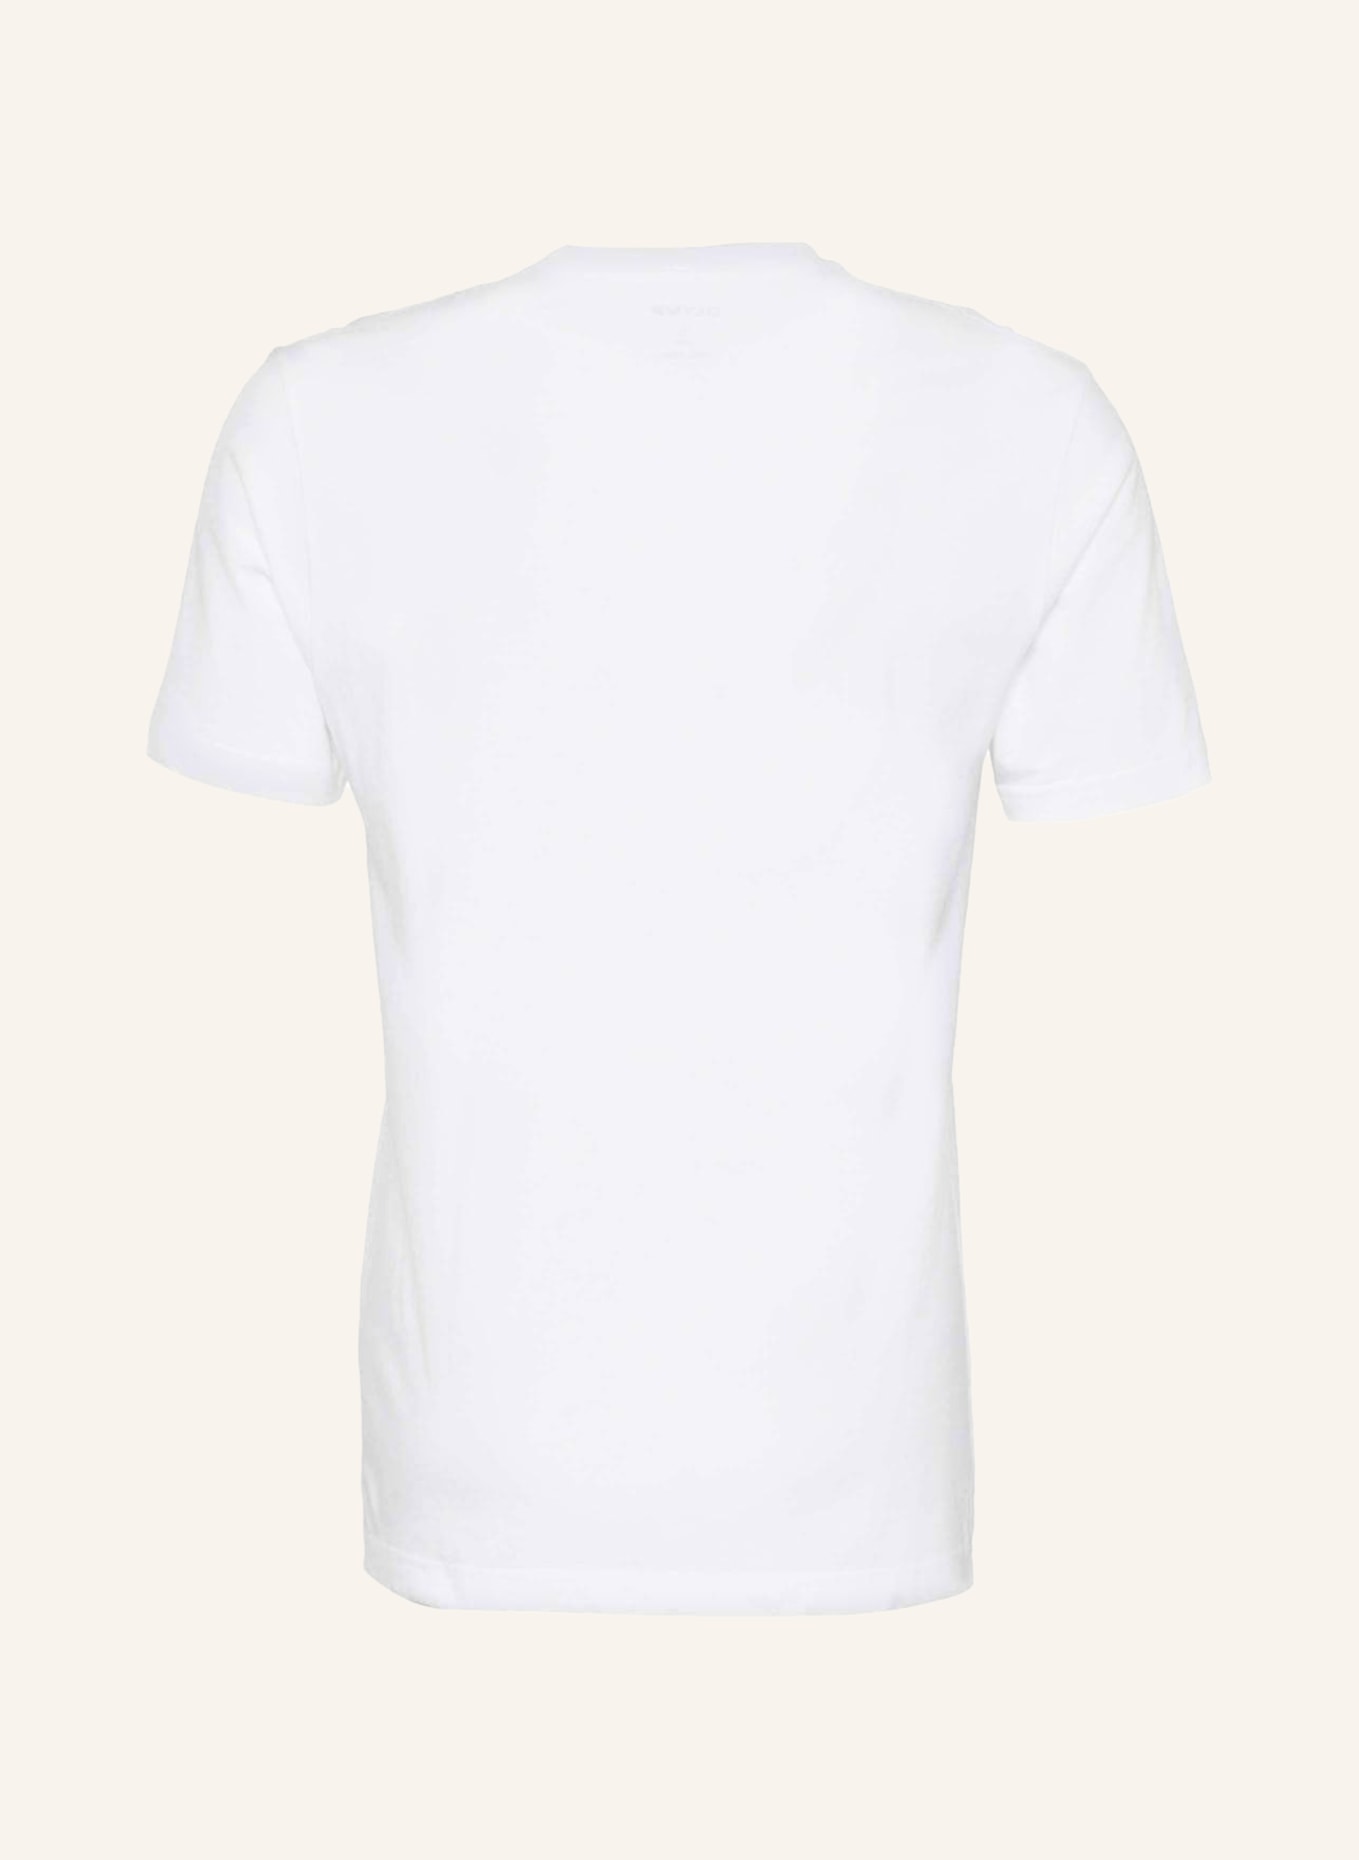 OLYMP 2er-Pack T-Shirts, Farbe: WEISS (Bild 2)